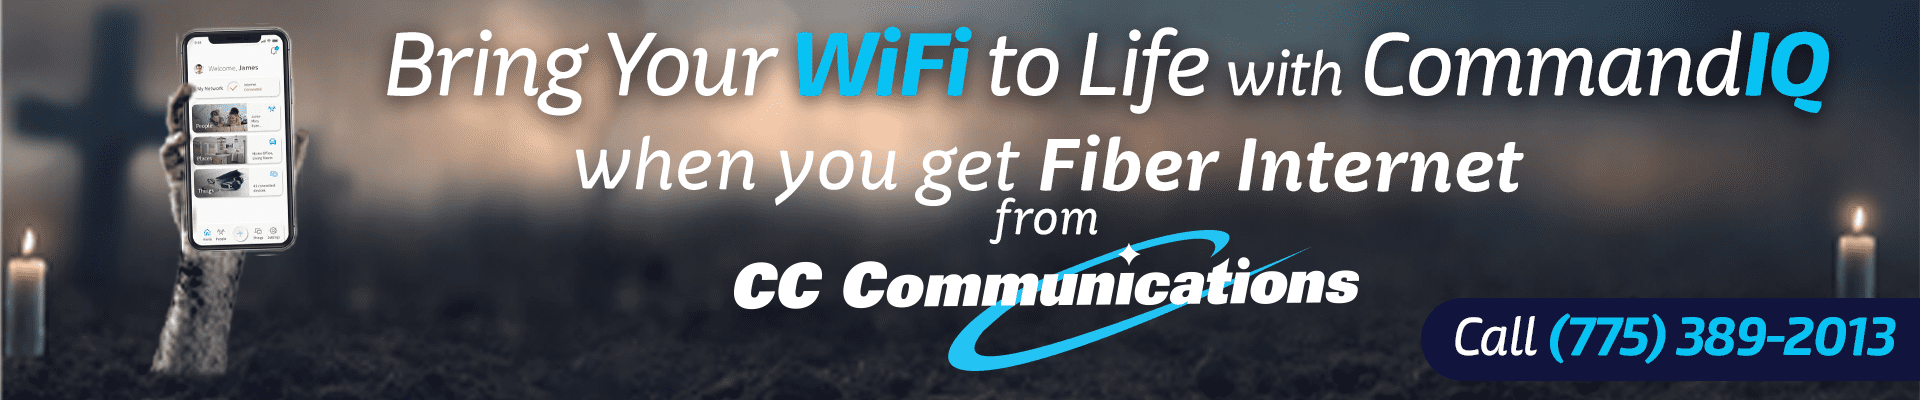 Bring WiFi to life with CommandIQ when you get Fiber Internet from CC Communications.